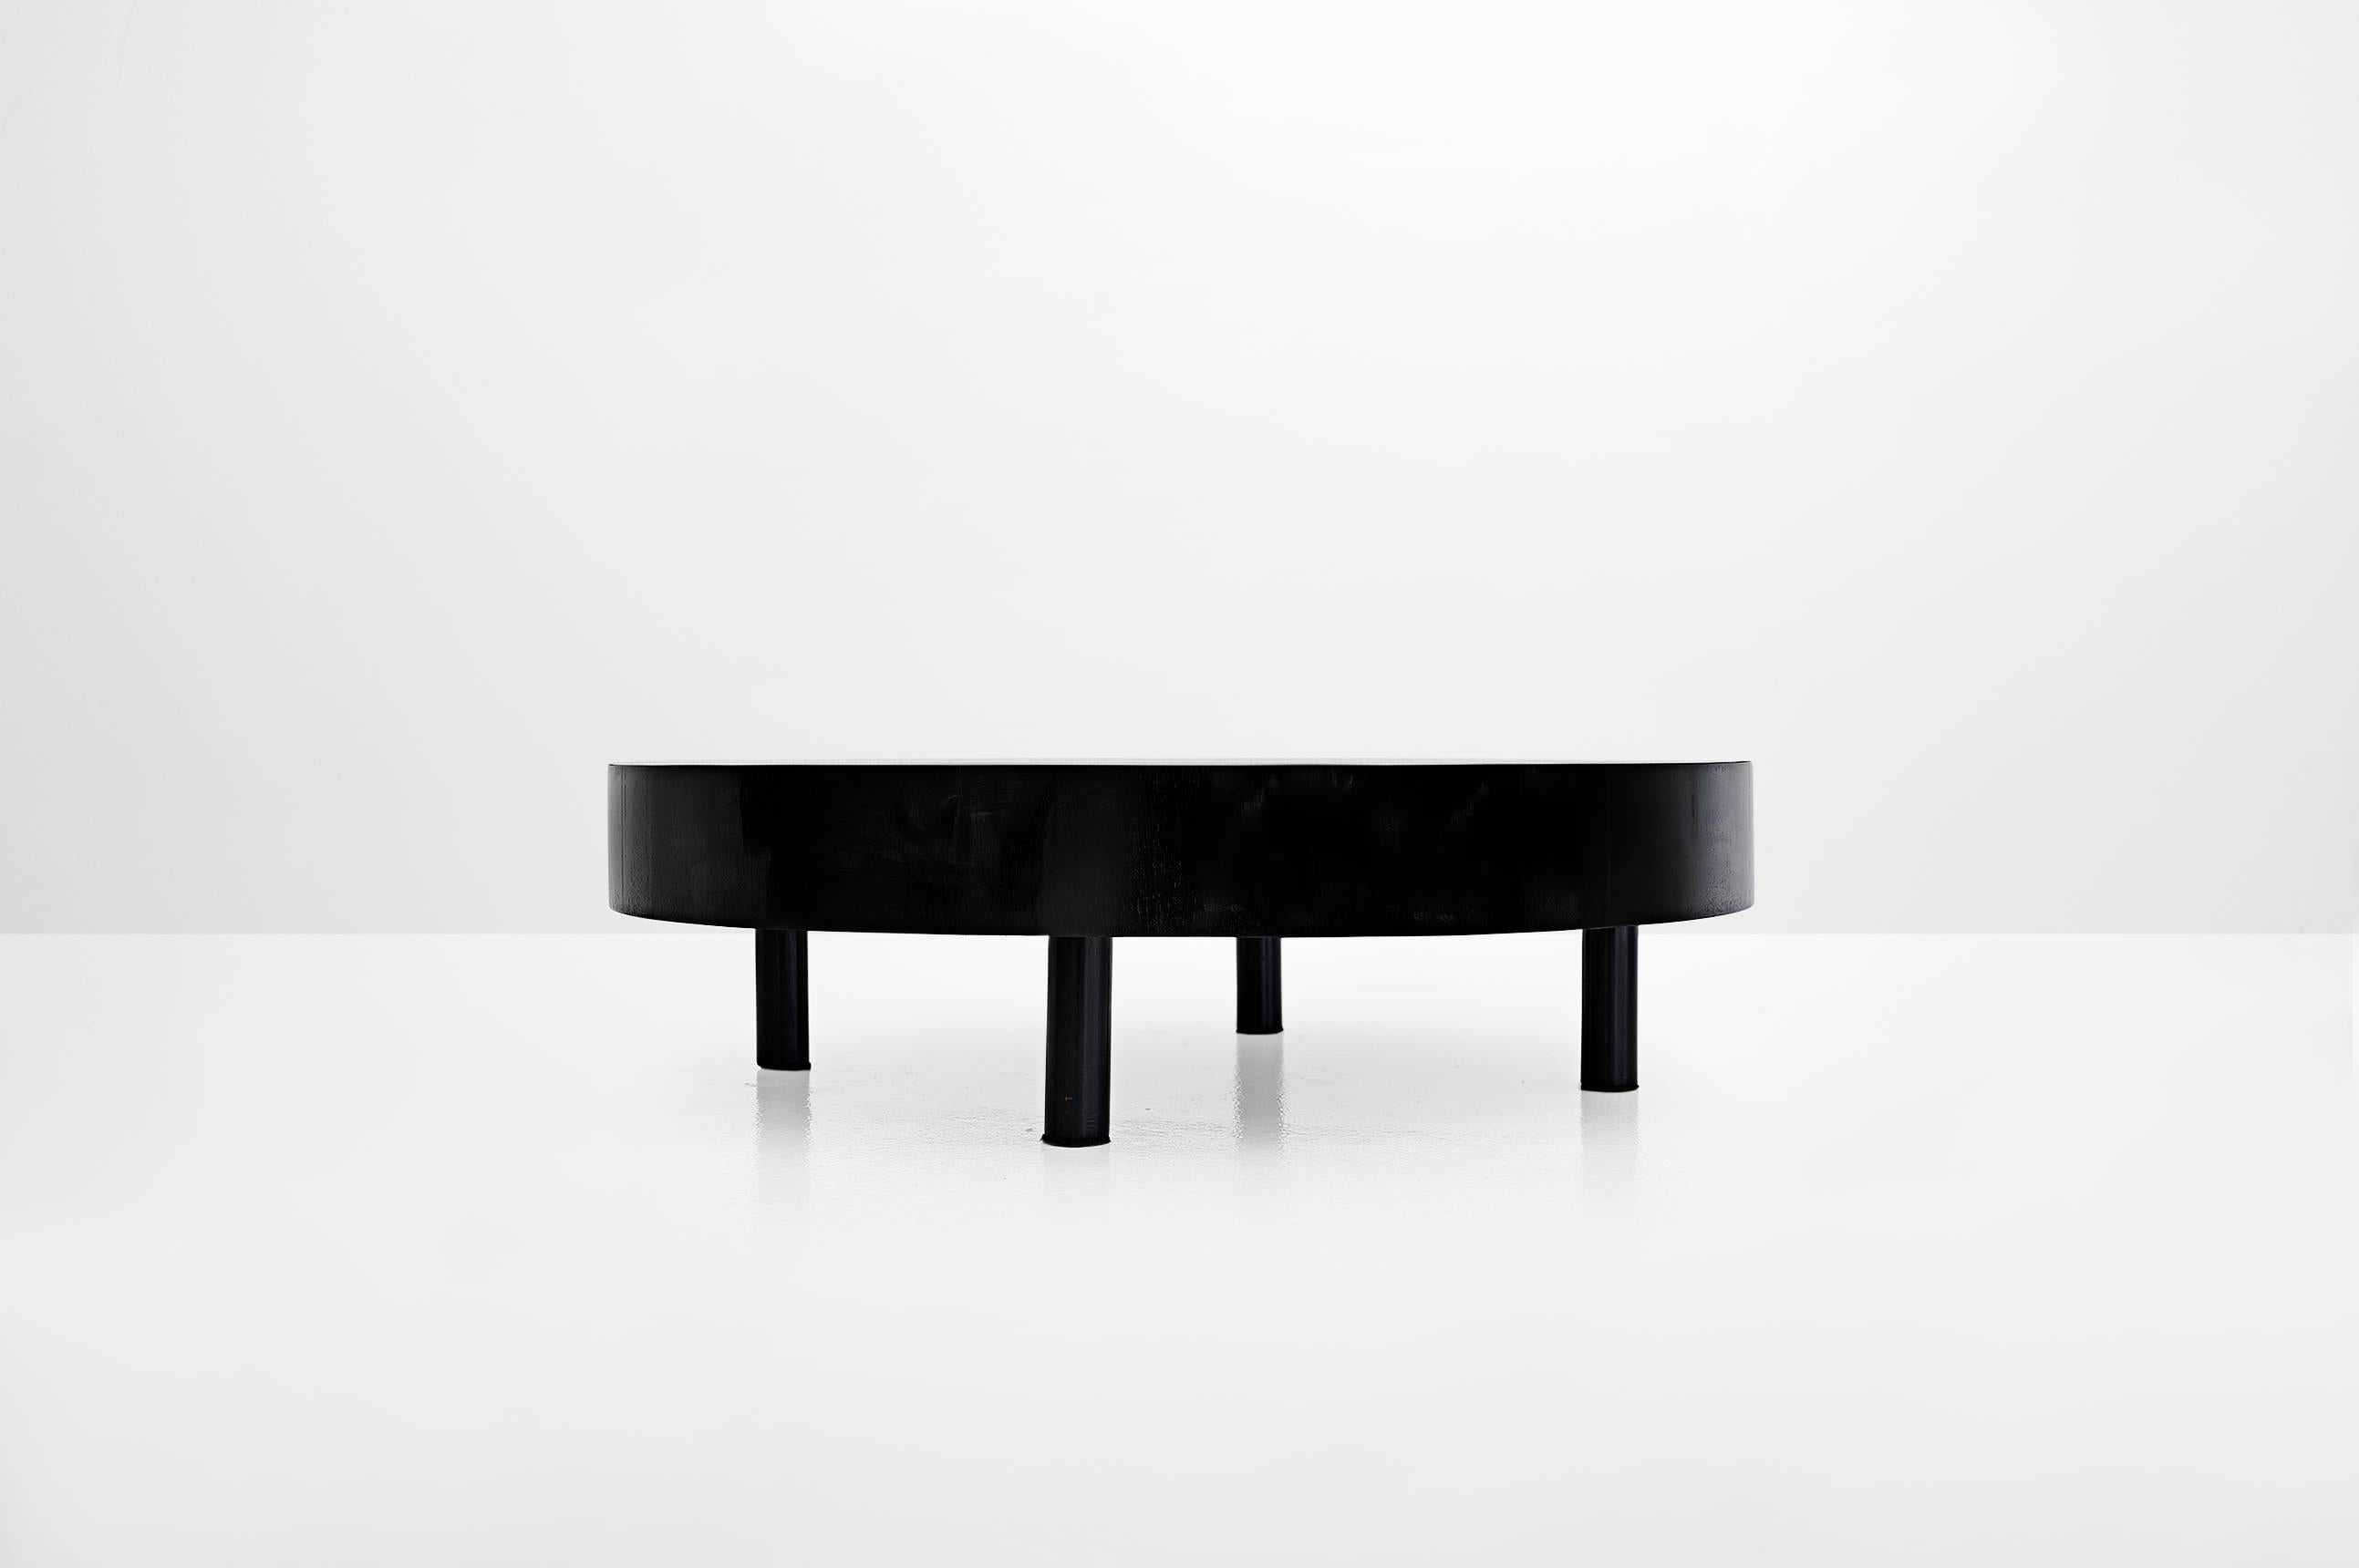 Round coffee table
Manufactured by Tepperman
Brasil, 1968
Lacquered black wood

Measurements
99 cm diameter x 28 height cm.
39 in diameter x 11.4 height in.